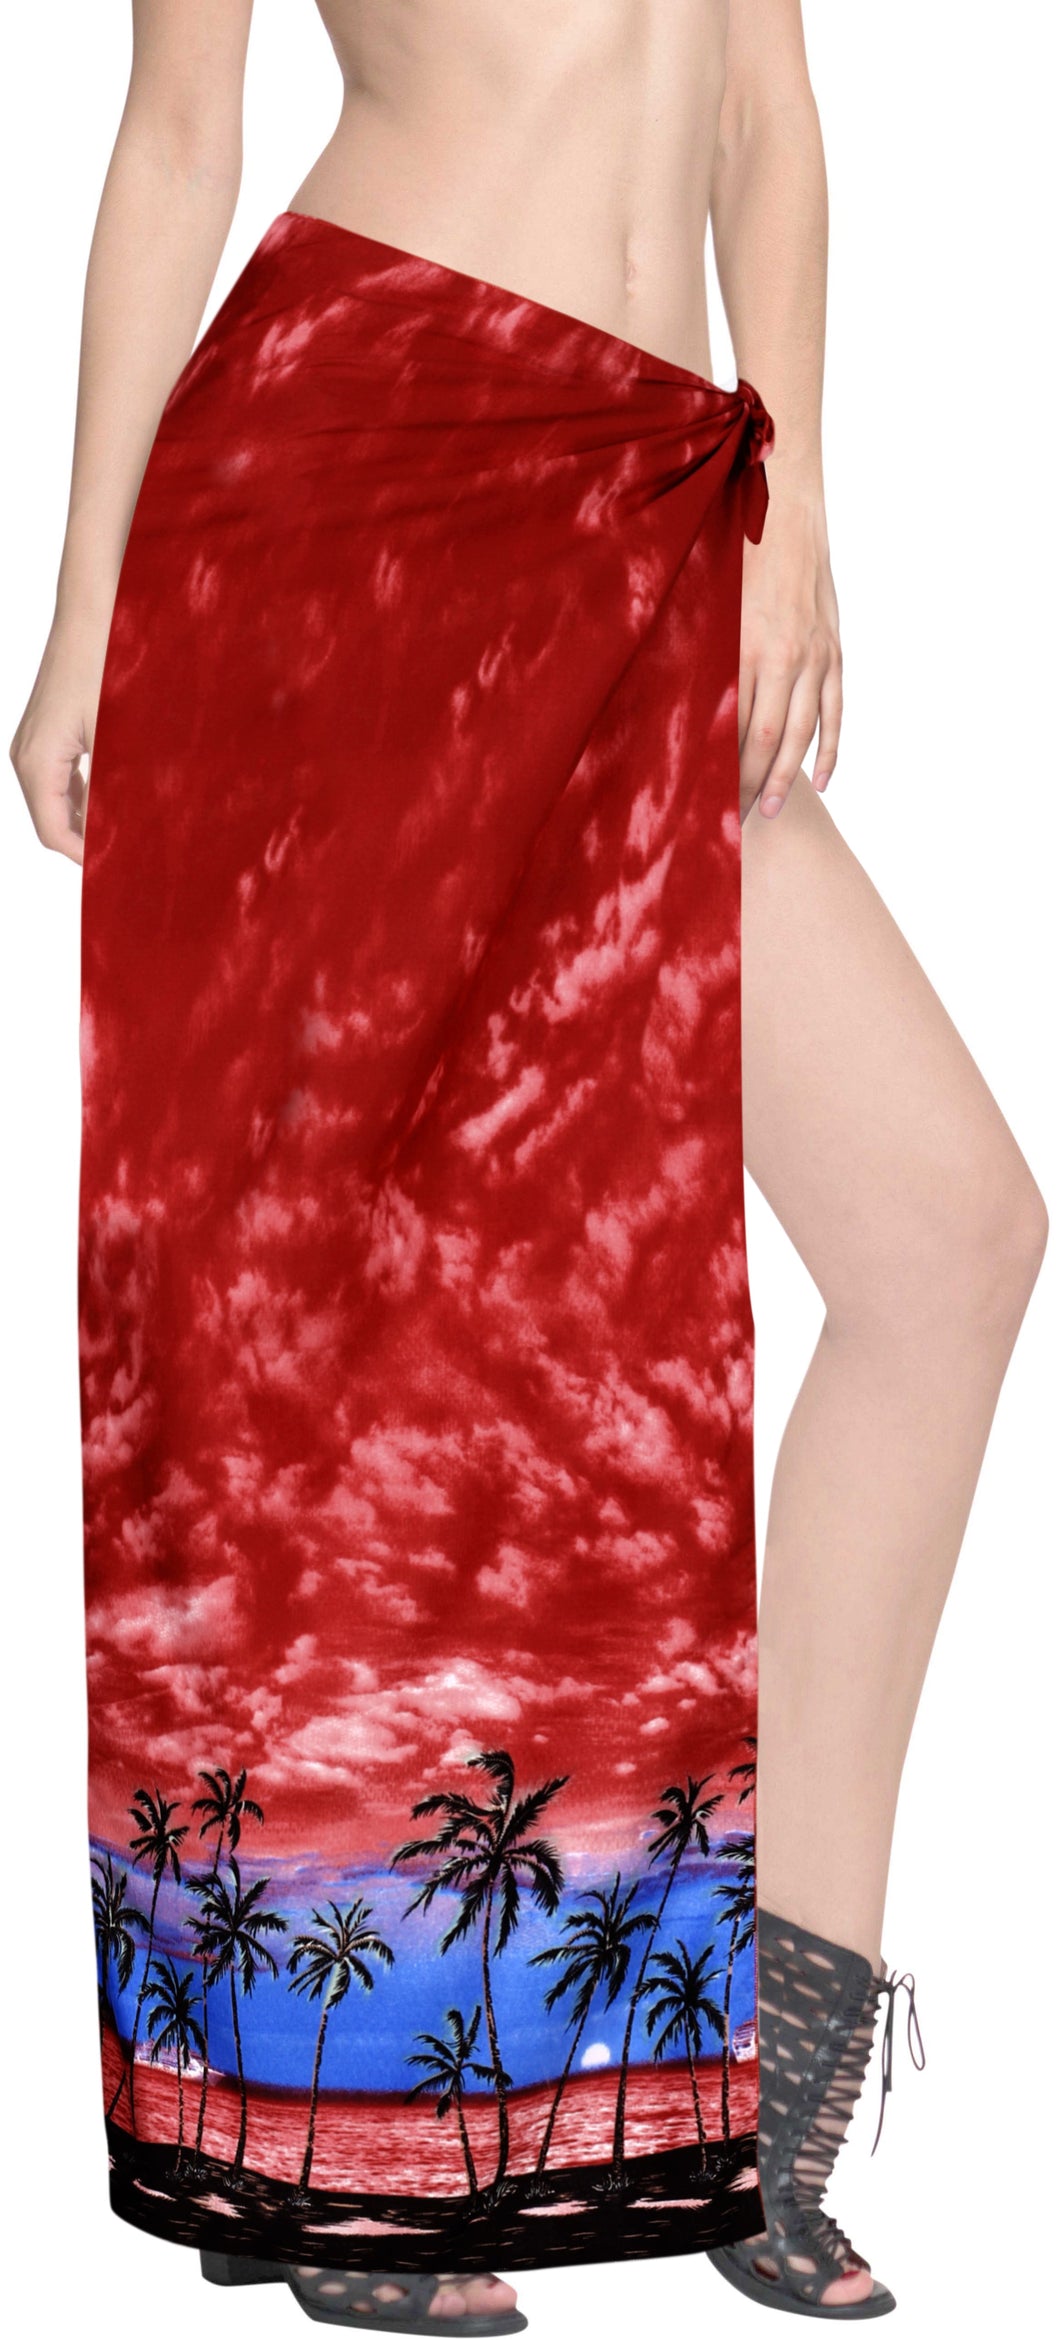 LA LEELA Women Sarong Pareo Swimsuit Skirt Beach Cover Up Wrap One Size Red_E749